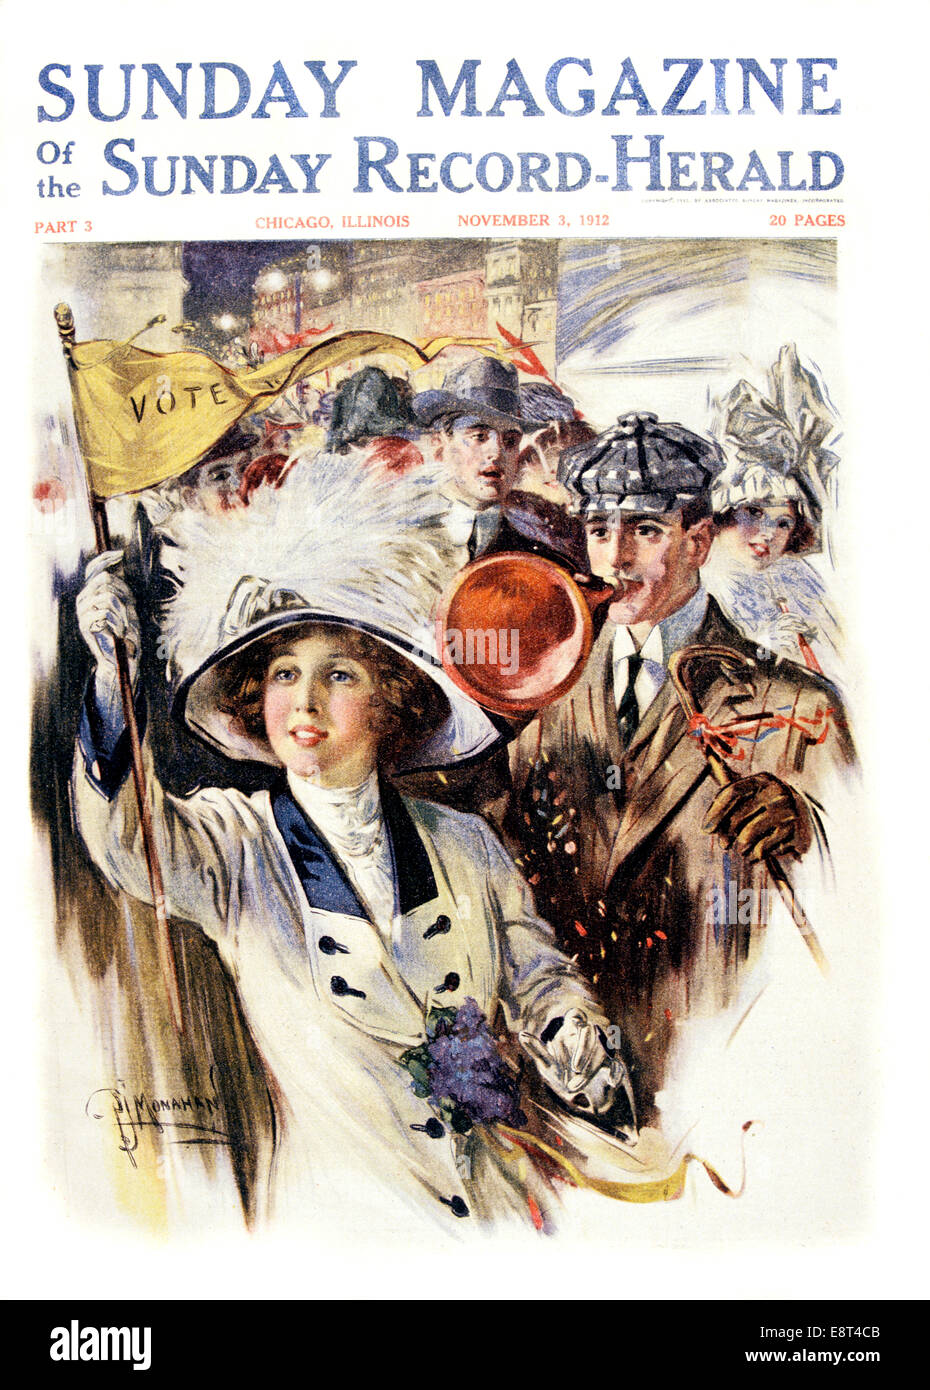 1910s 1912 COVER SUNDAY MAGAZINE CHICAGO RALLY FOR WOMAN'S RIGHT TO VOTE WOMEN SUFFRAGE Stock Photo